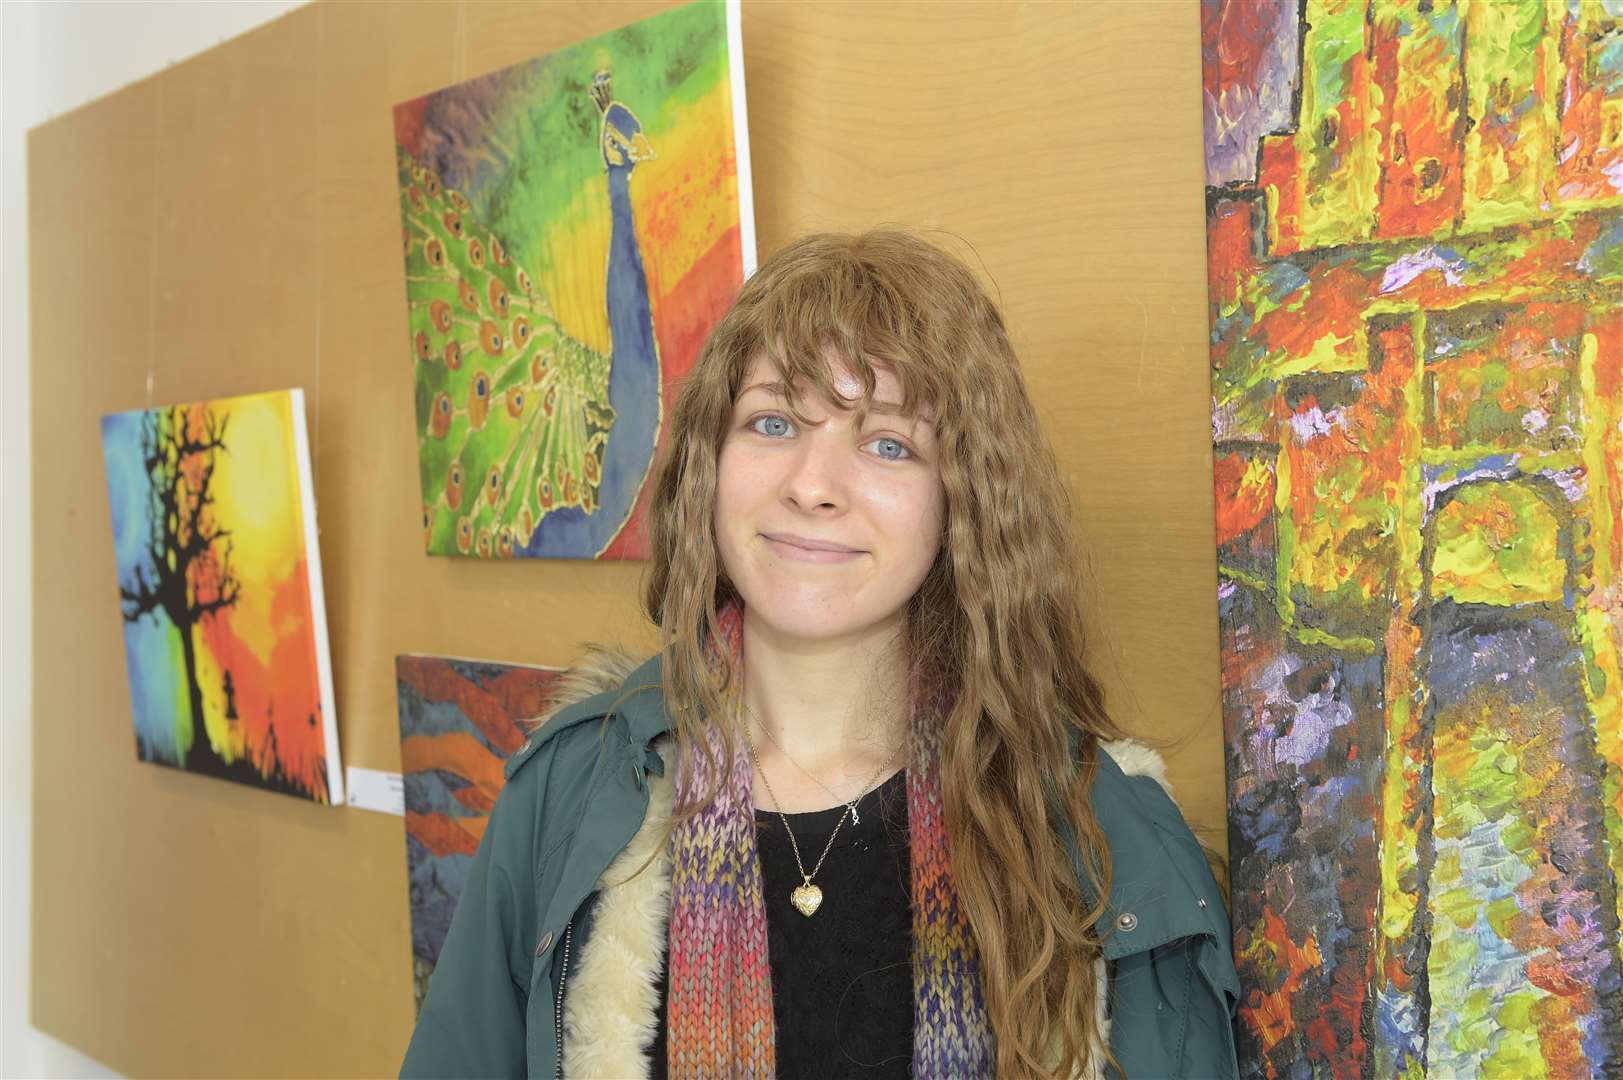 Kelly Turner with some of her own artwork, which was exhibited in October 2016 at My Gallery, Clocktower, marine Parade, Dover